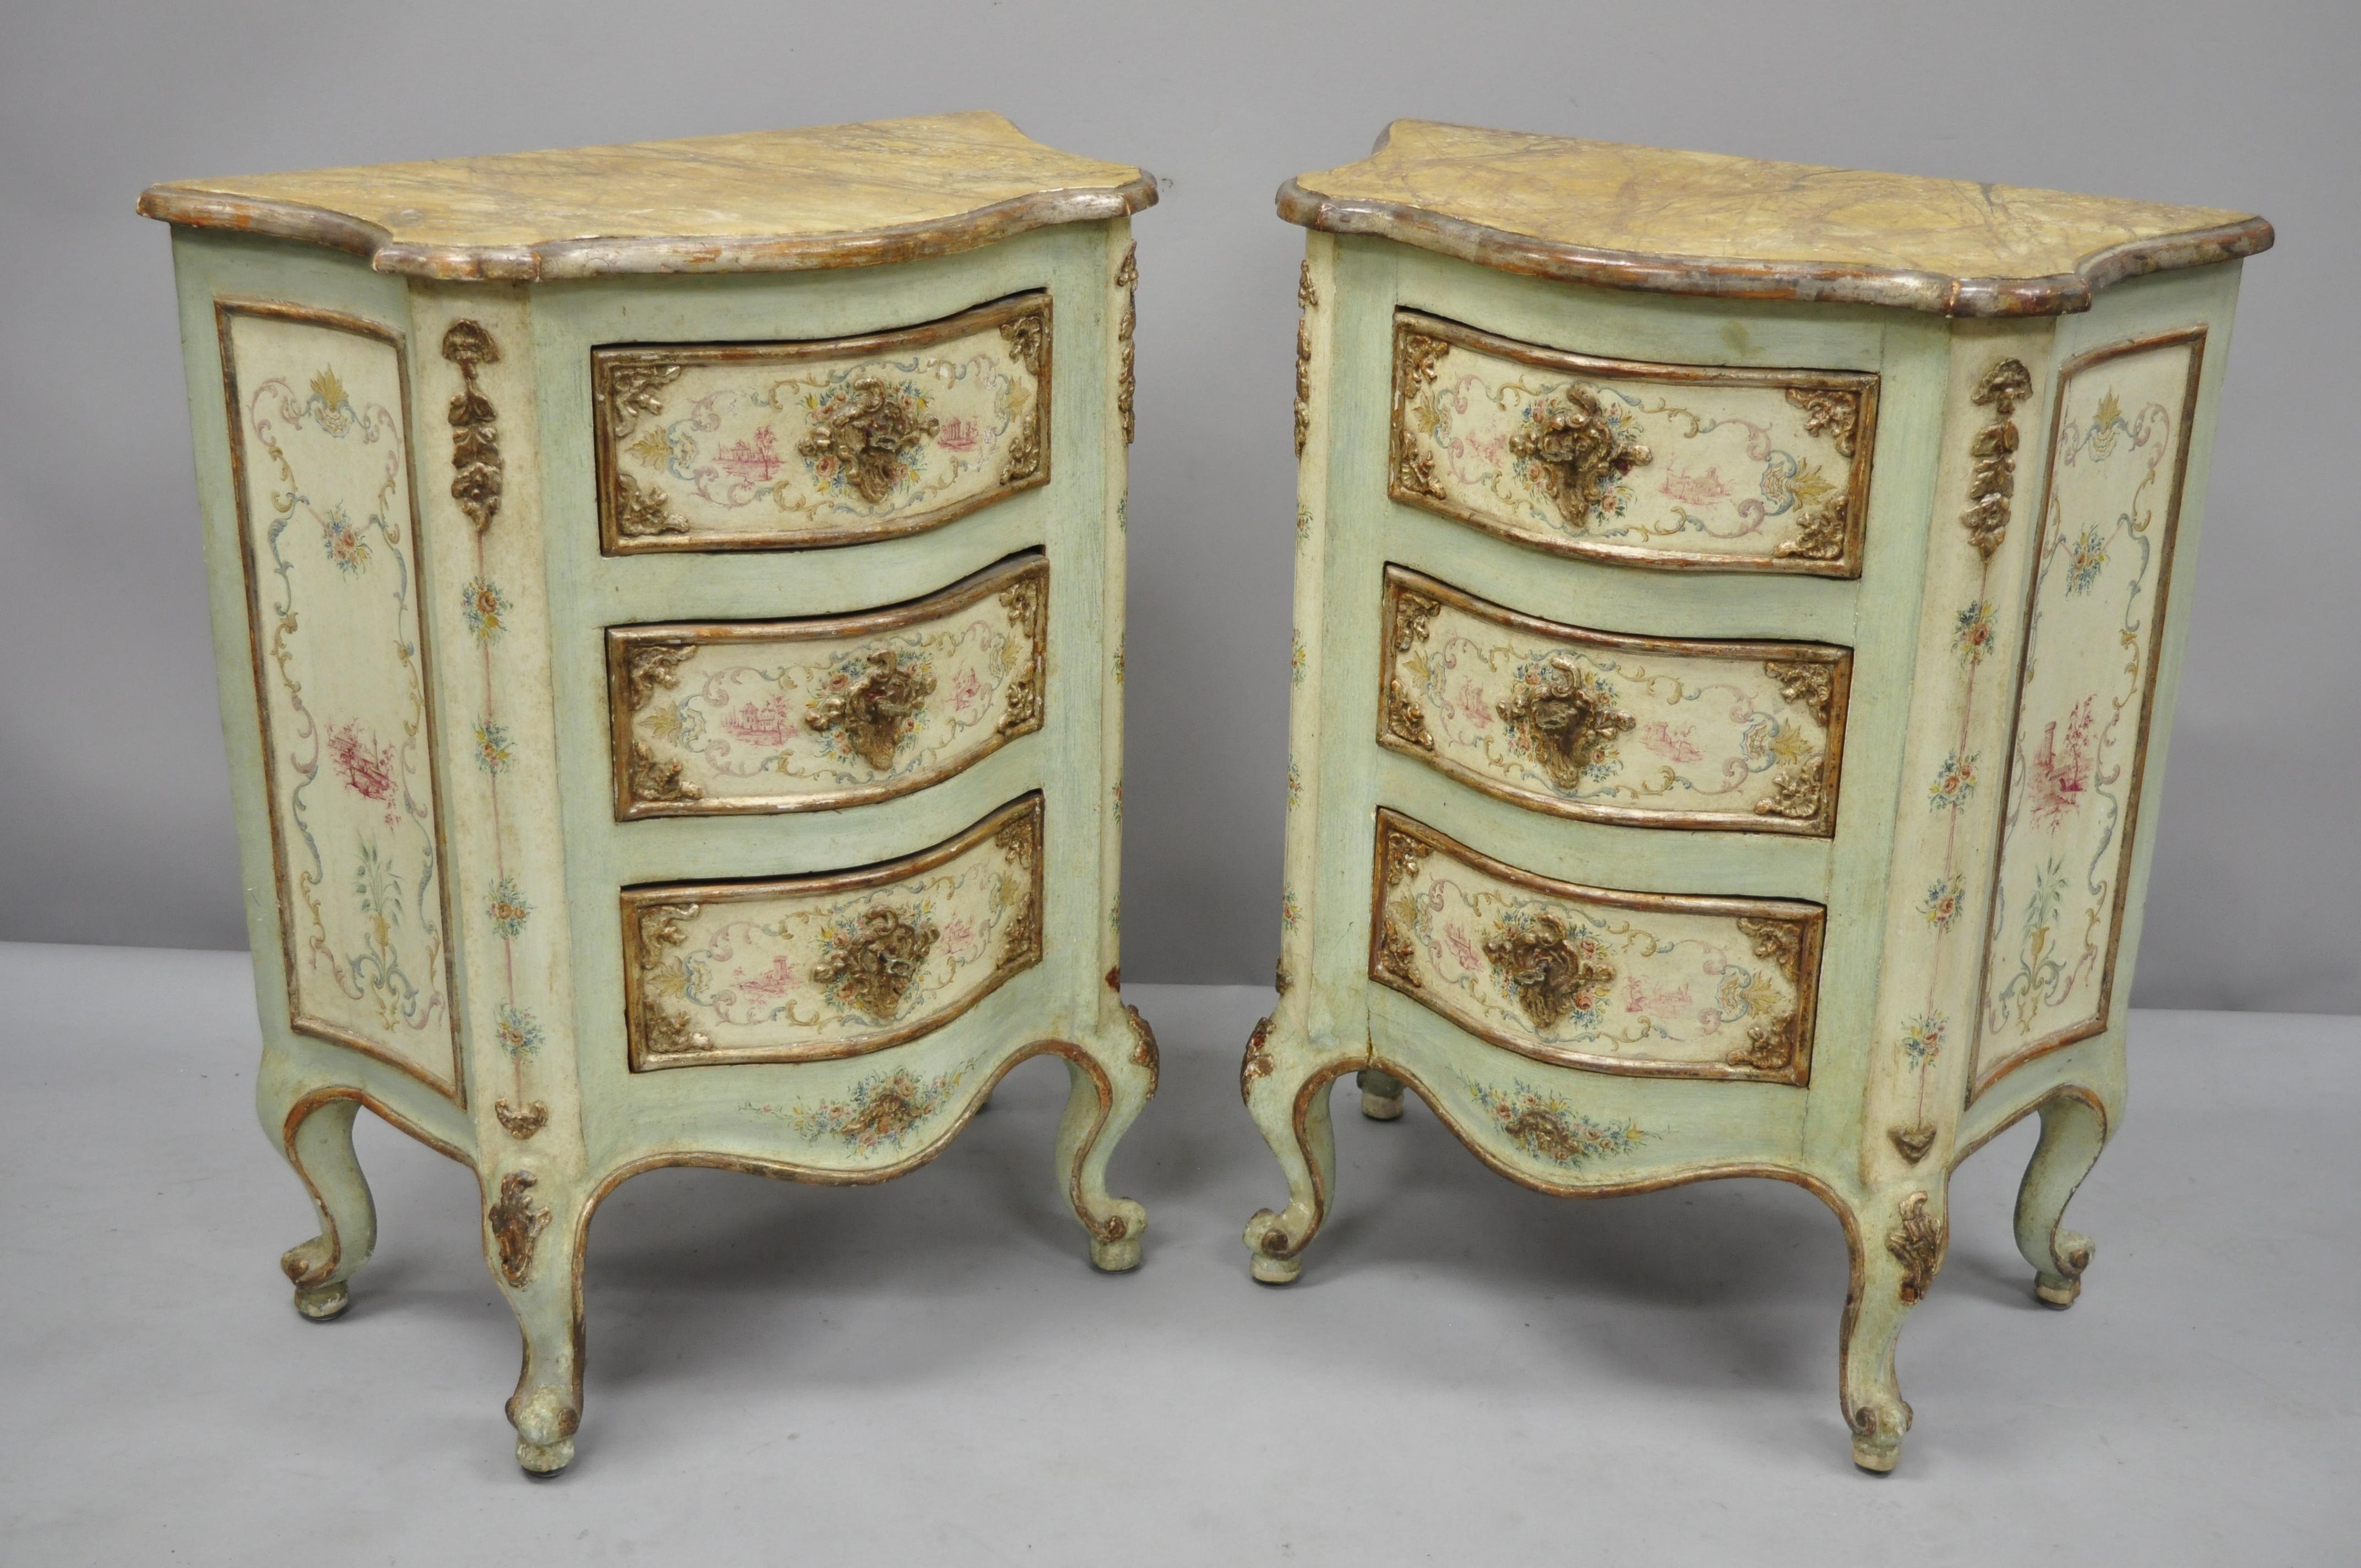 Pair of Italian Venetian Petite 3-drawer painted bombe commode nightstands. Painted faux marble tops, hand painted floral details, shapely bombe form, original label, cabriole legs, very nice antique item, great style and form. circa early 20th